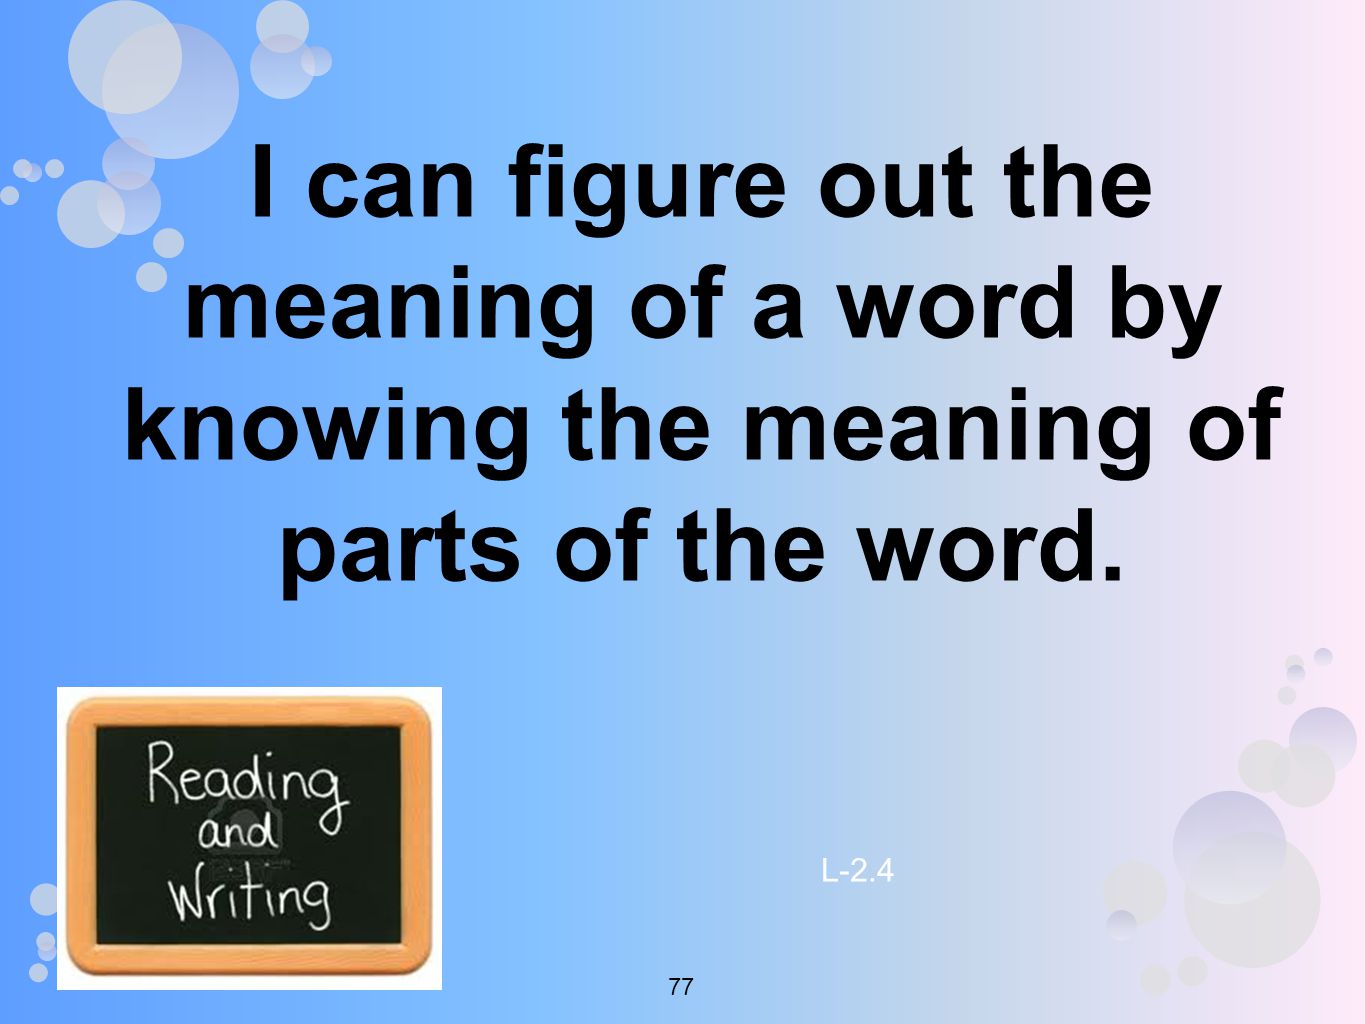 I can figure out the meaning of a word by knowing the meaning of parts of the word. L